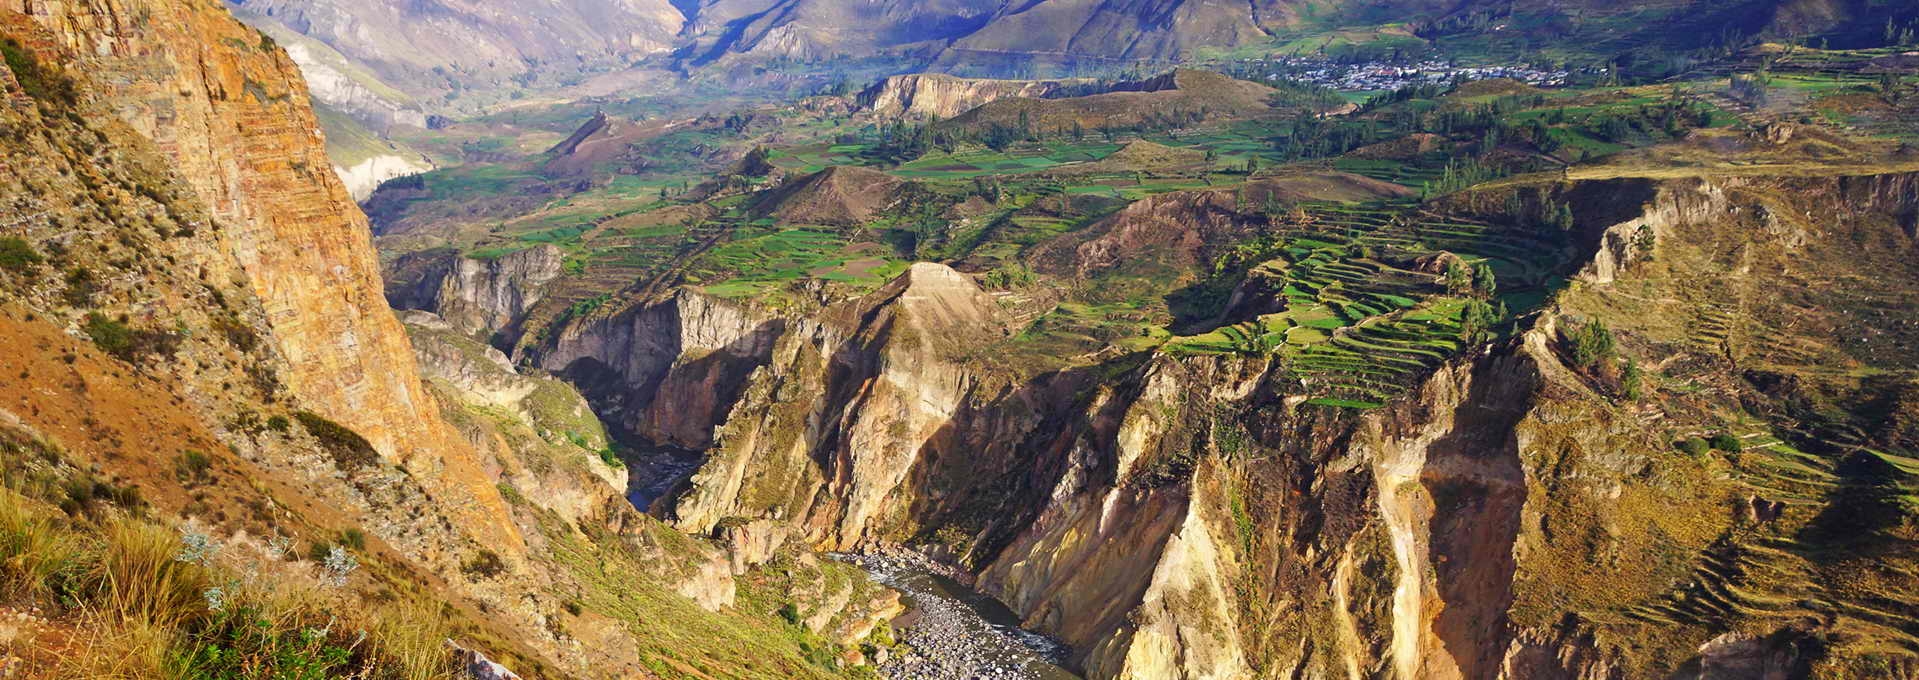 The greatness of the Colca Canyon